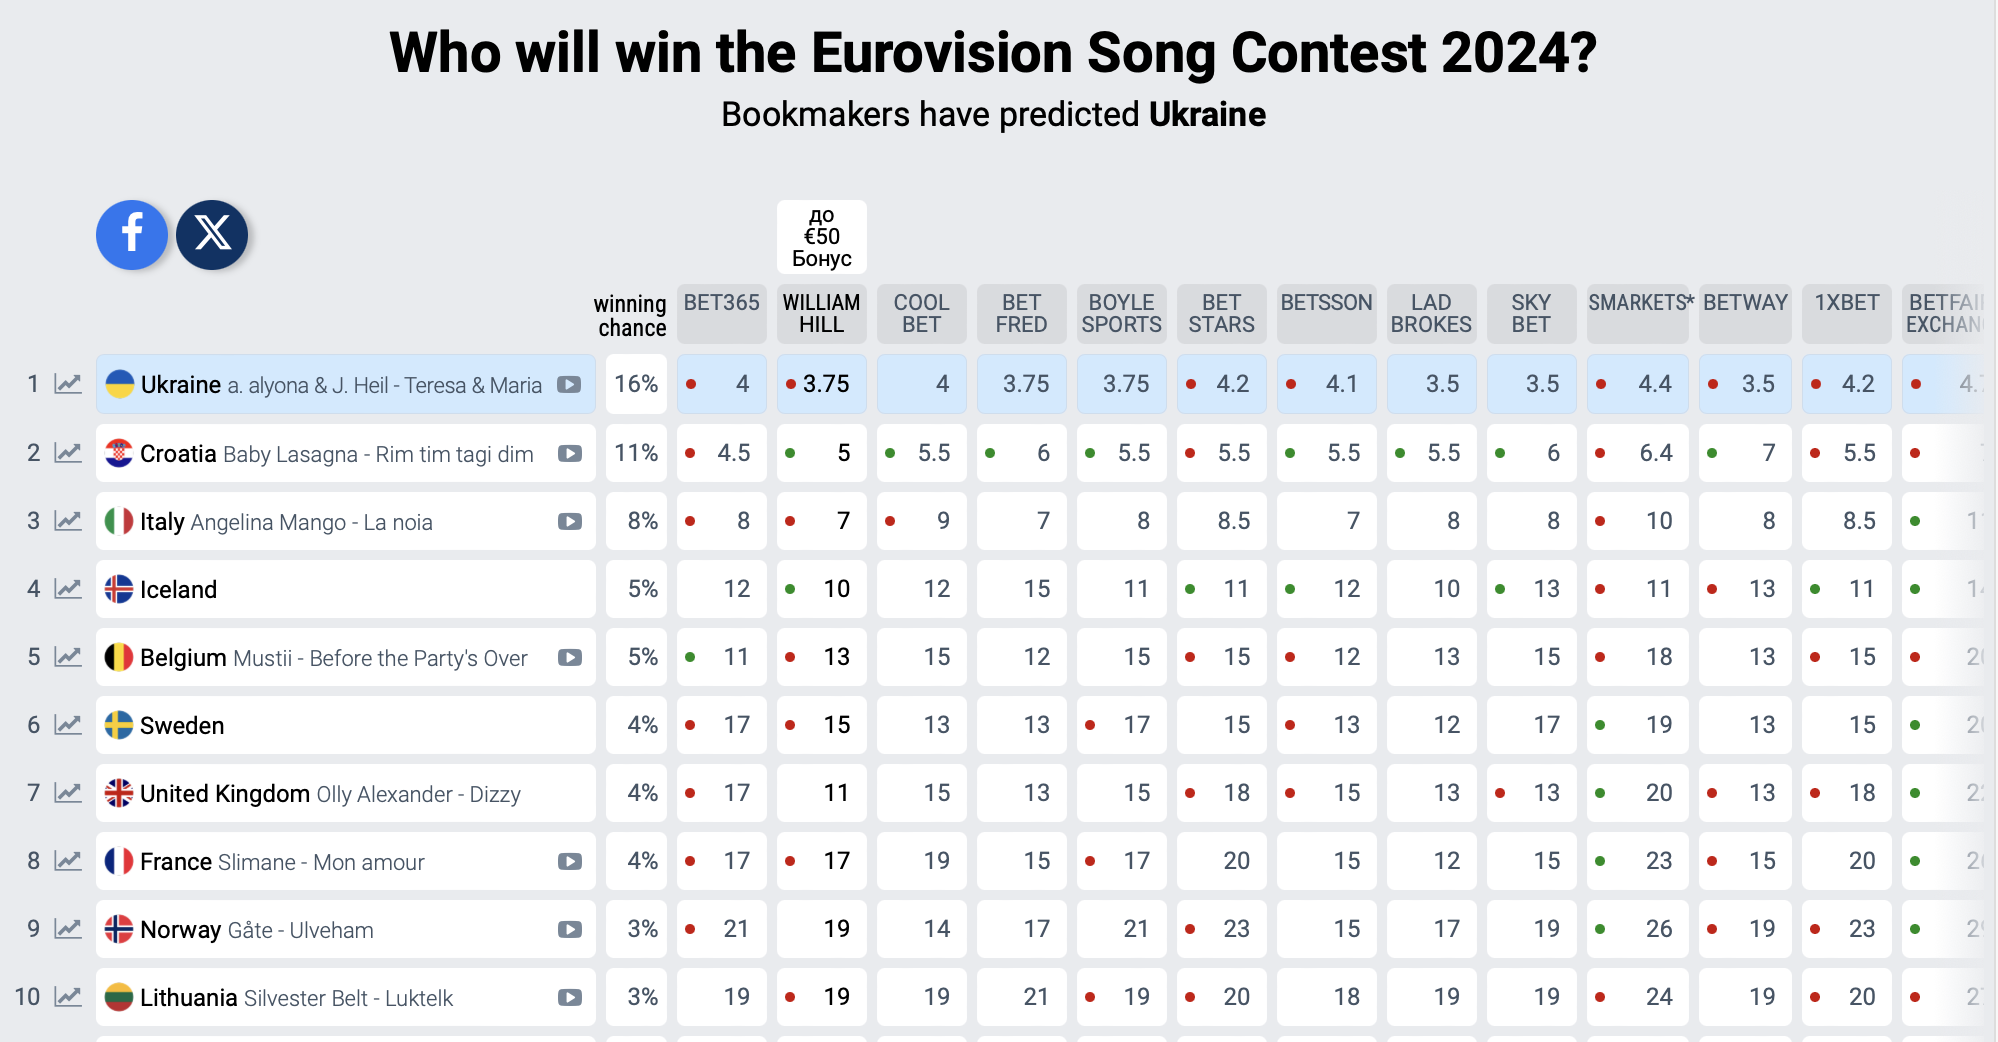 Eurovision 2024 Baby Lasagna from Croatia is in the lead bookmakers